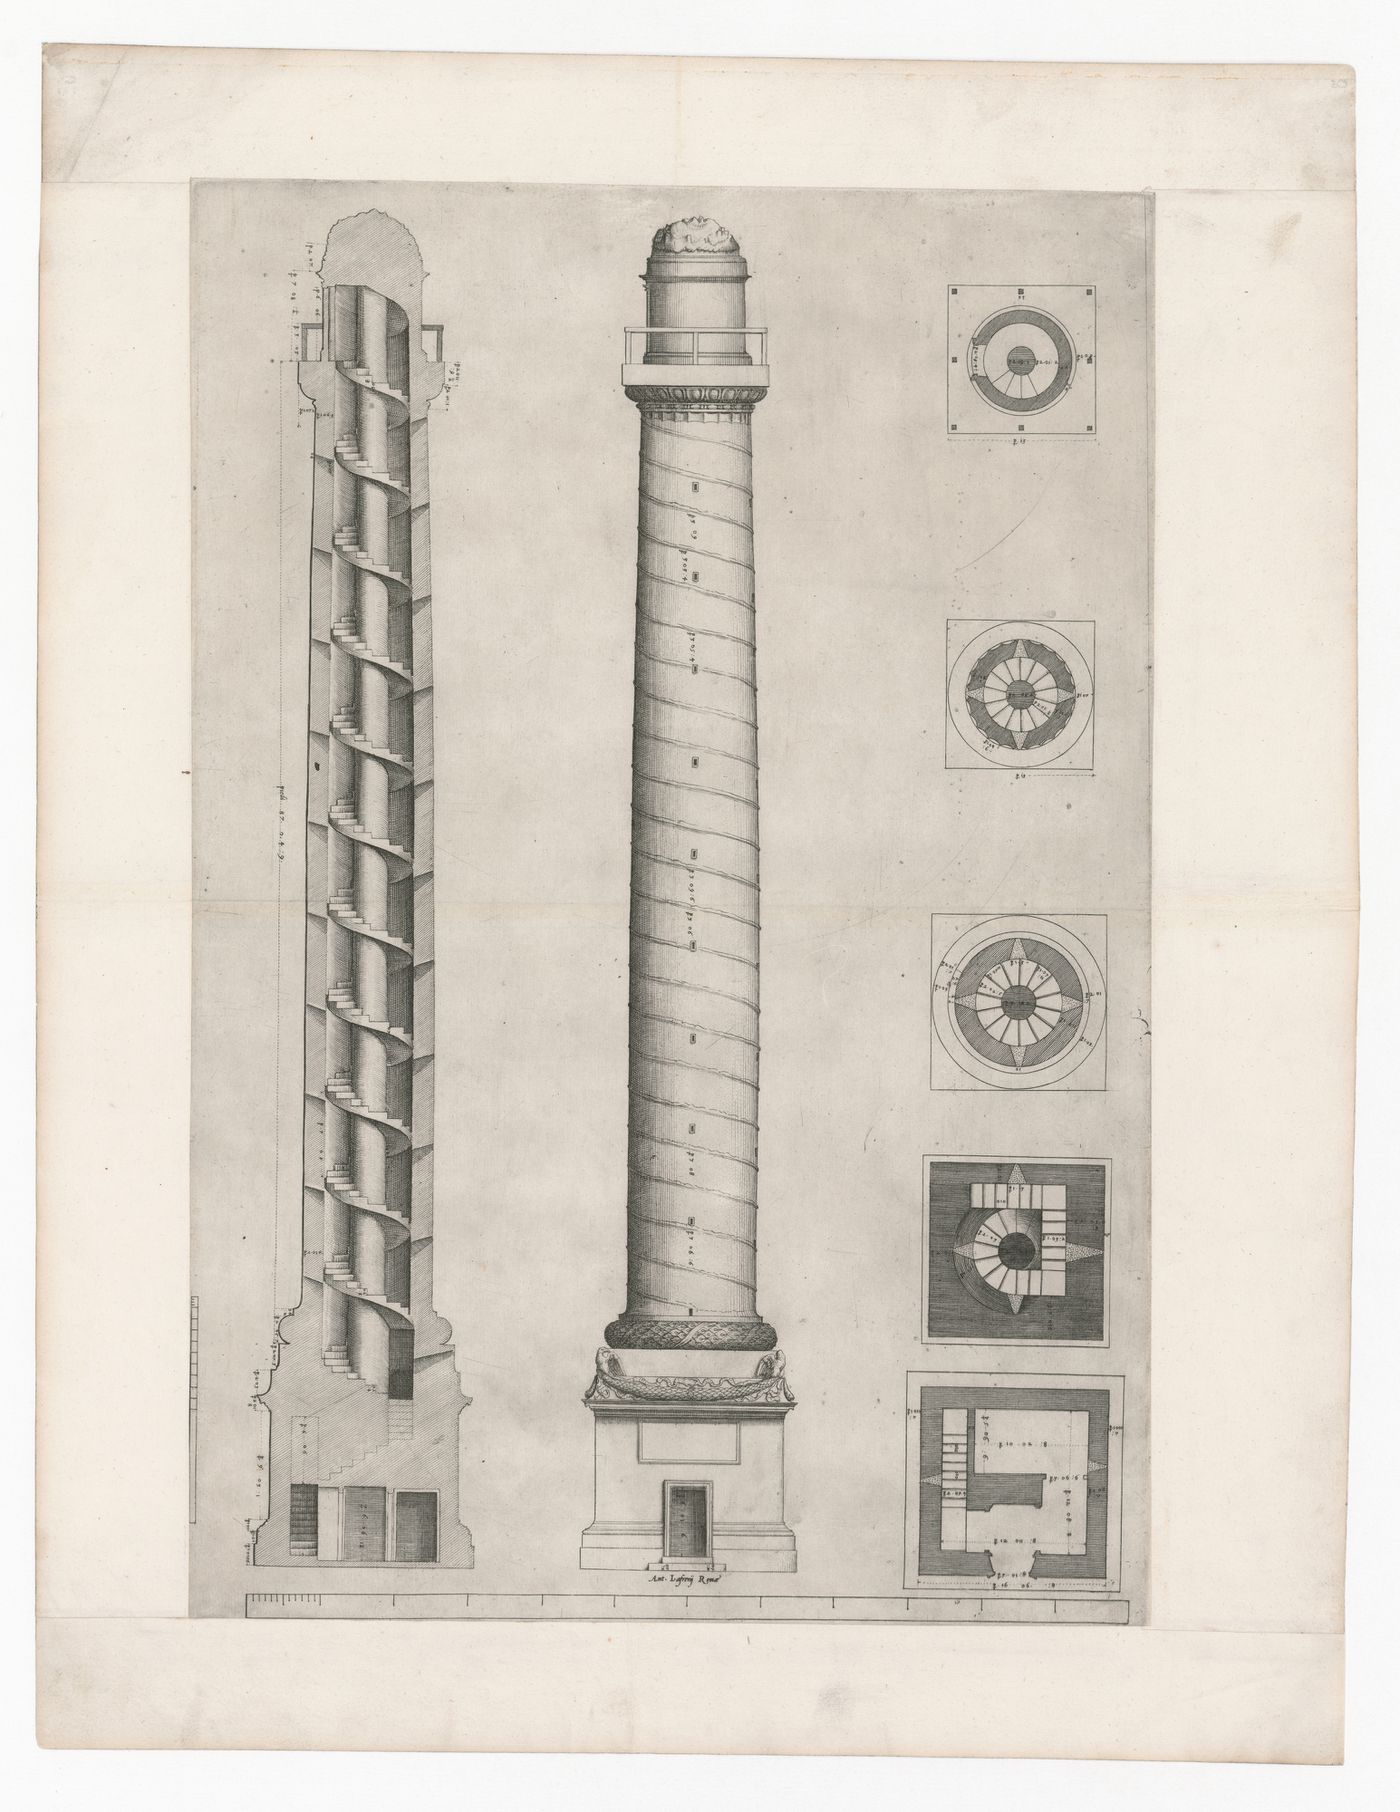 Section, elevation, and plans of Trajan's Column, Rome